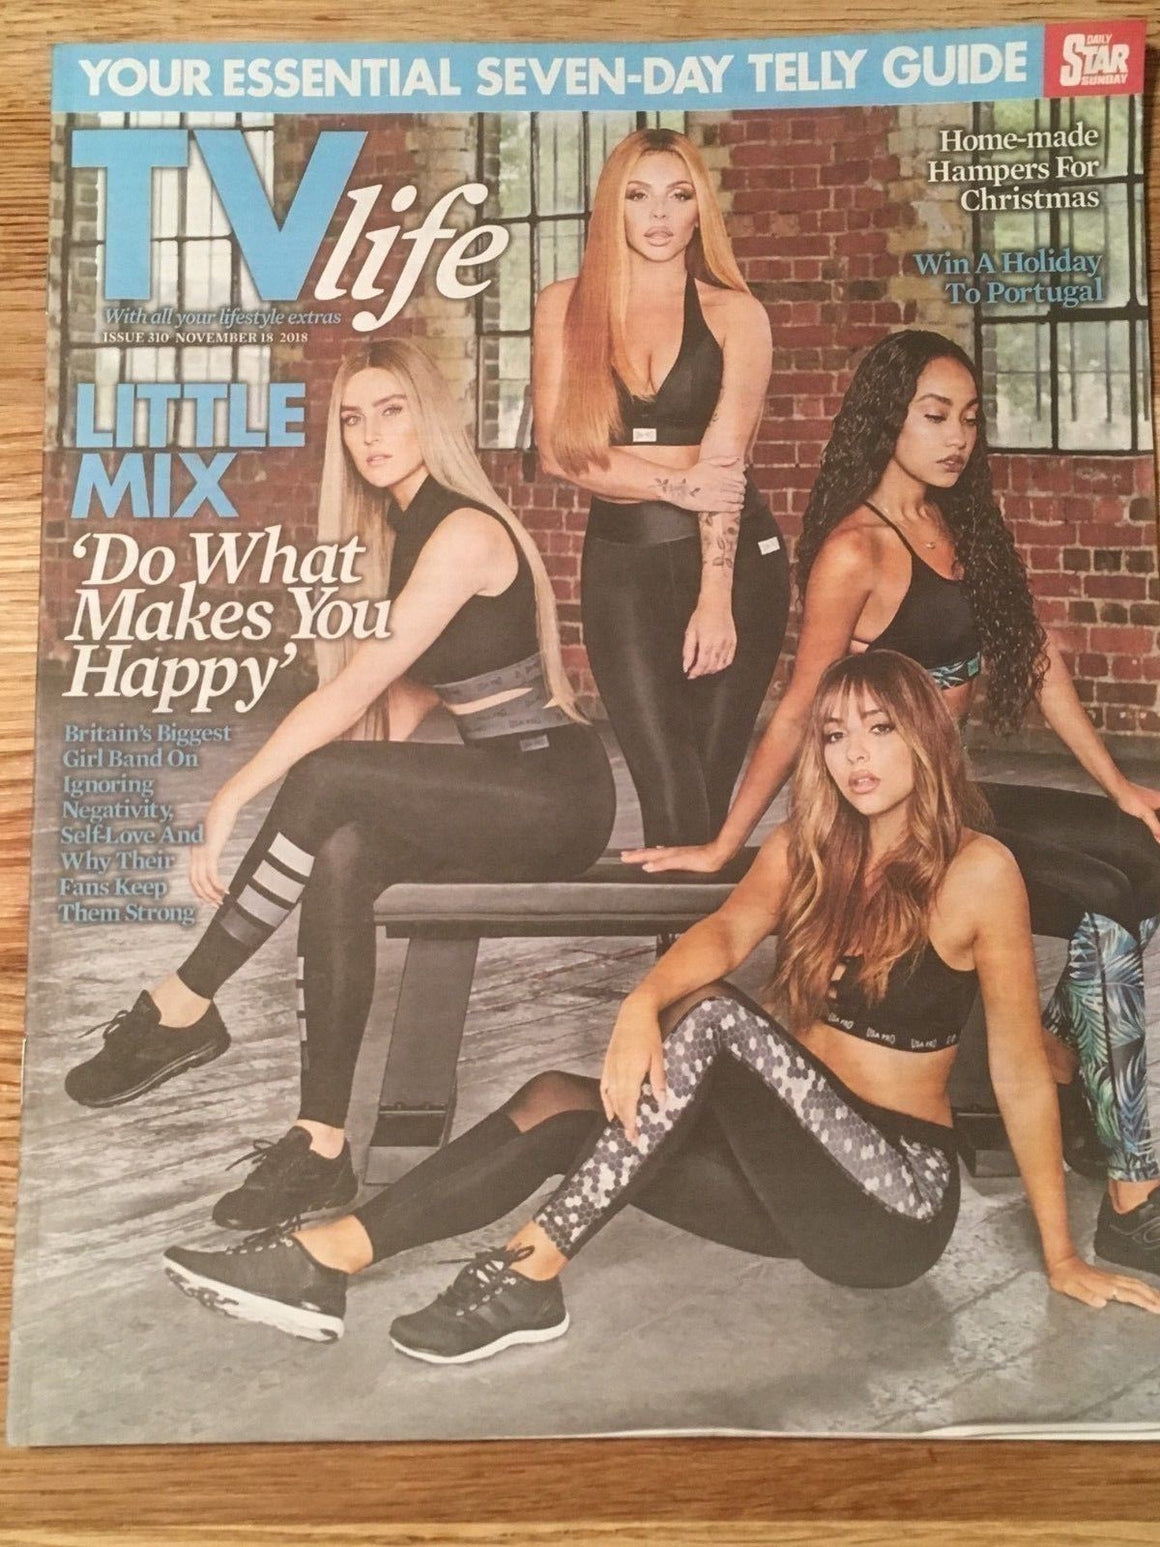 LITTLE MIX UK LIFE MAGAZINE JADE PERRIE LEIGH JESY 2018 GEORGIA MAY FOOTE 5IVE